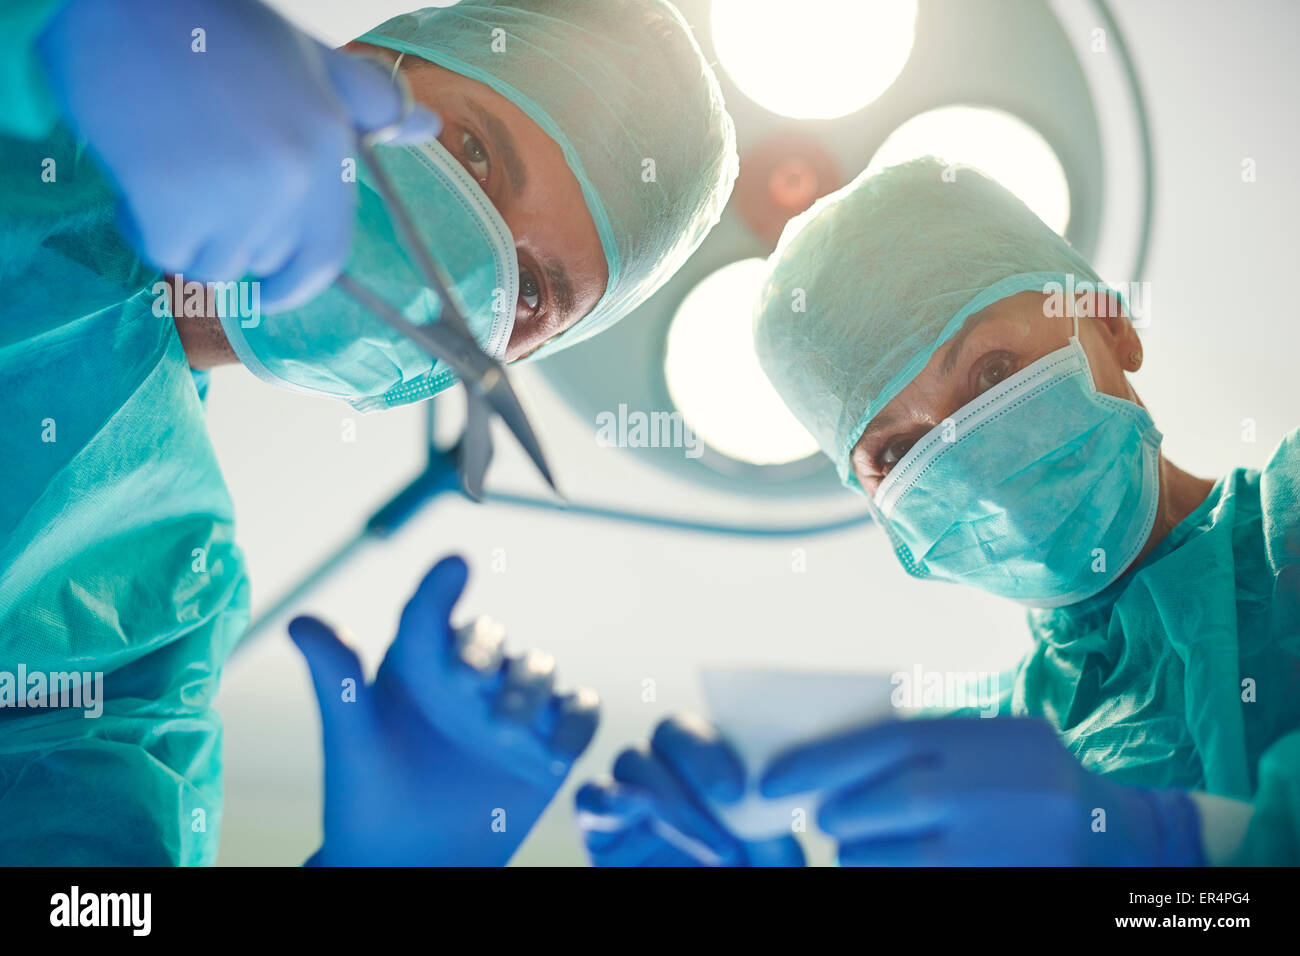 Experienced doctors during the operation. Debica, Poland Stock Photo